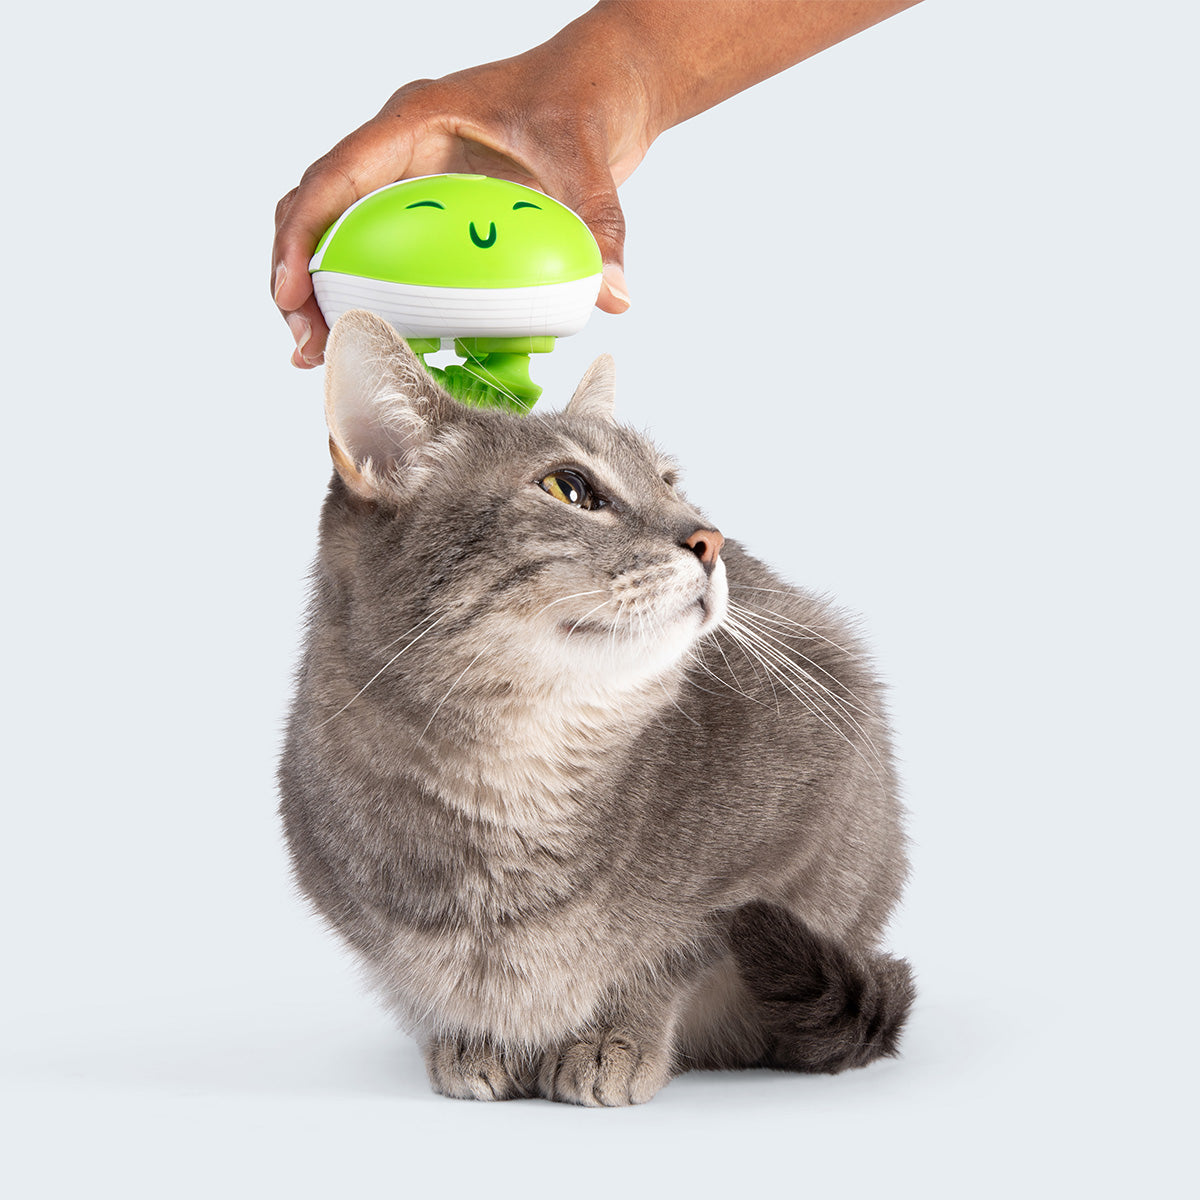 Paws & Relax: The Ultimate Pet Massager